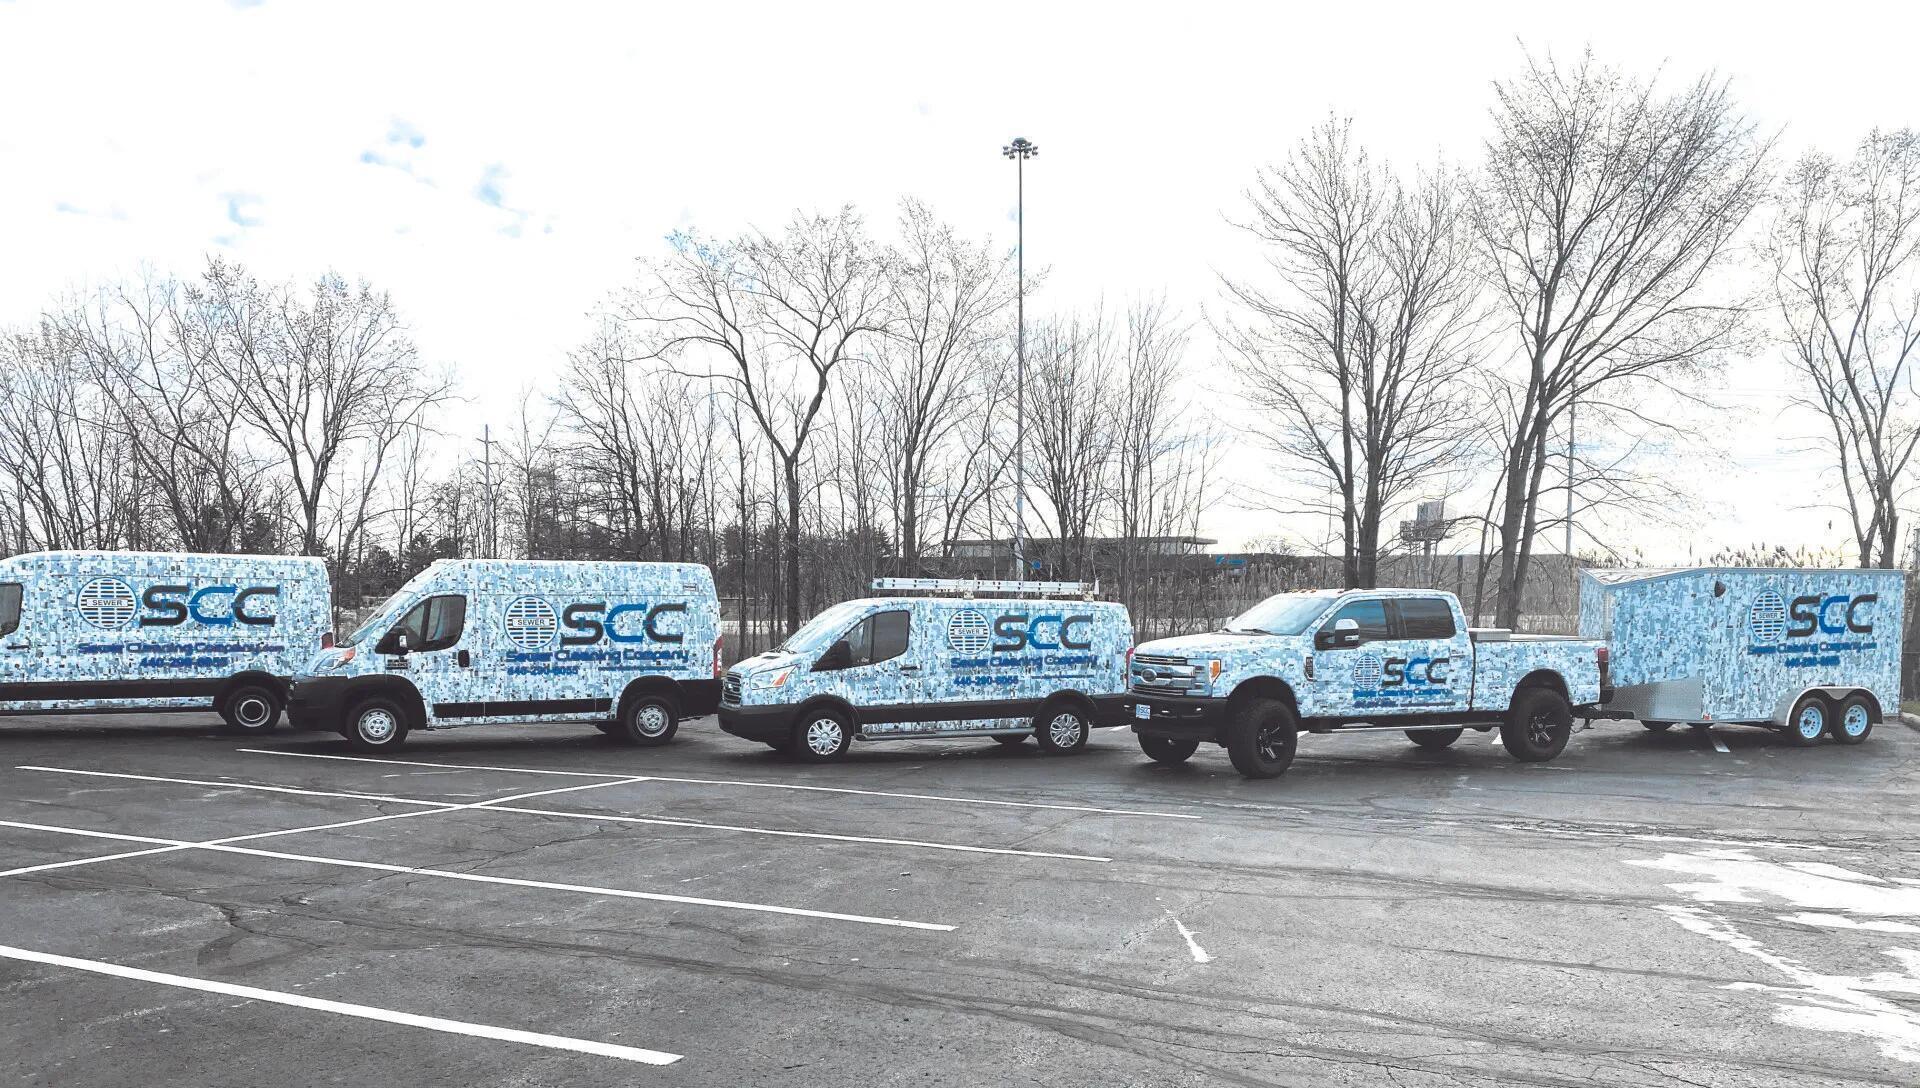 Fleet of work trucks from Sewer Cleaning Company, located in Cleveland, Ohio